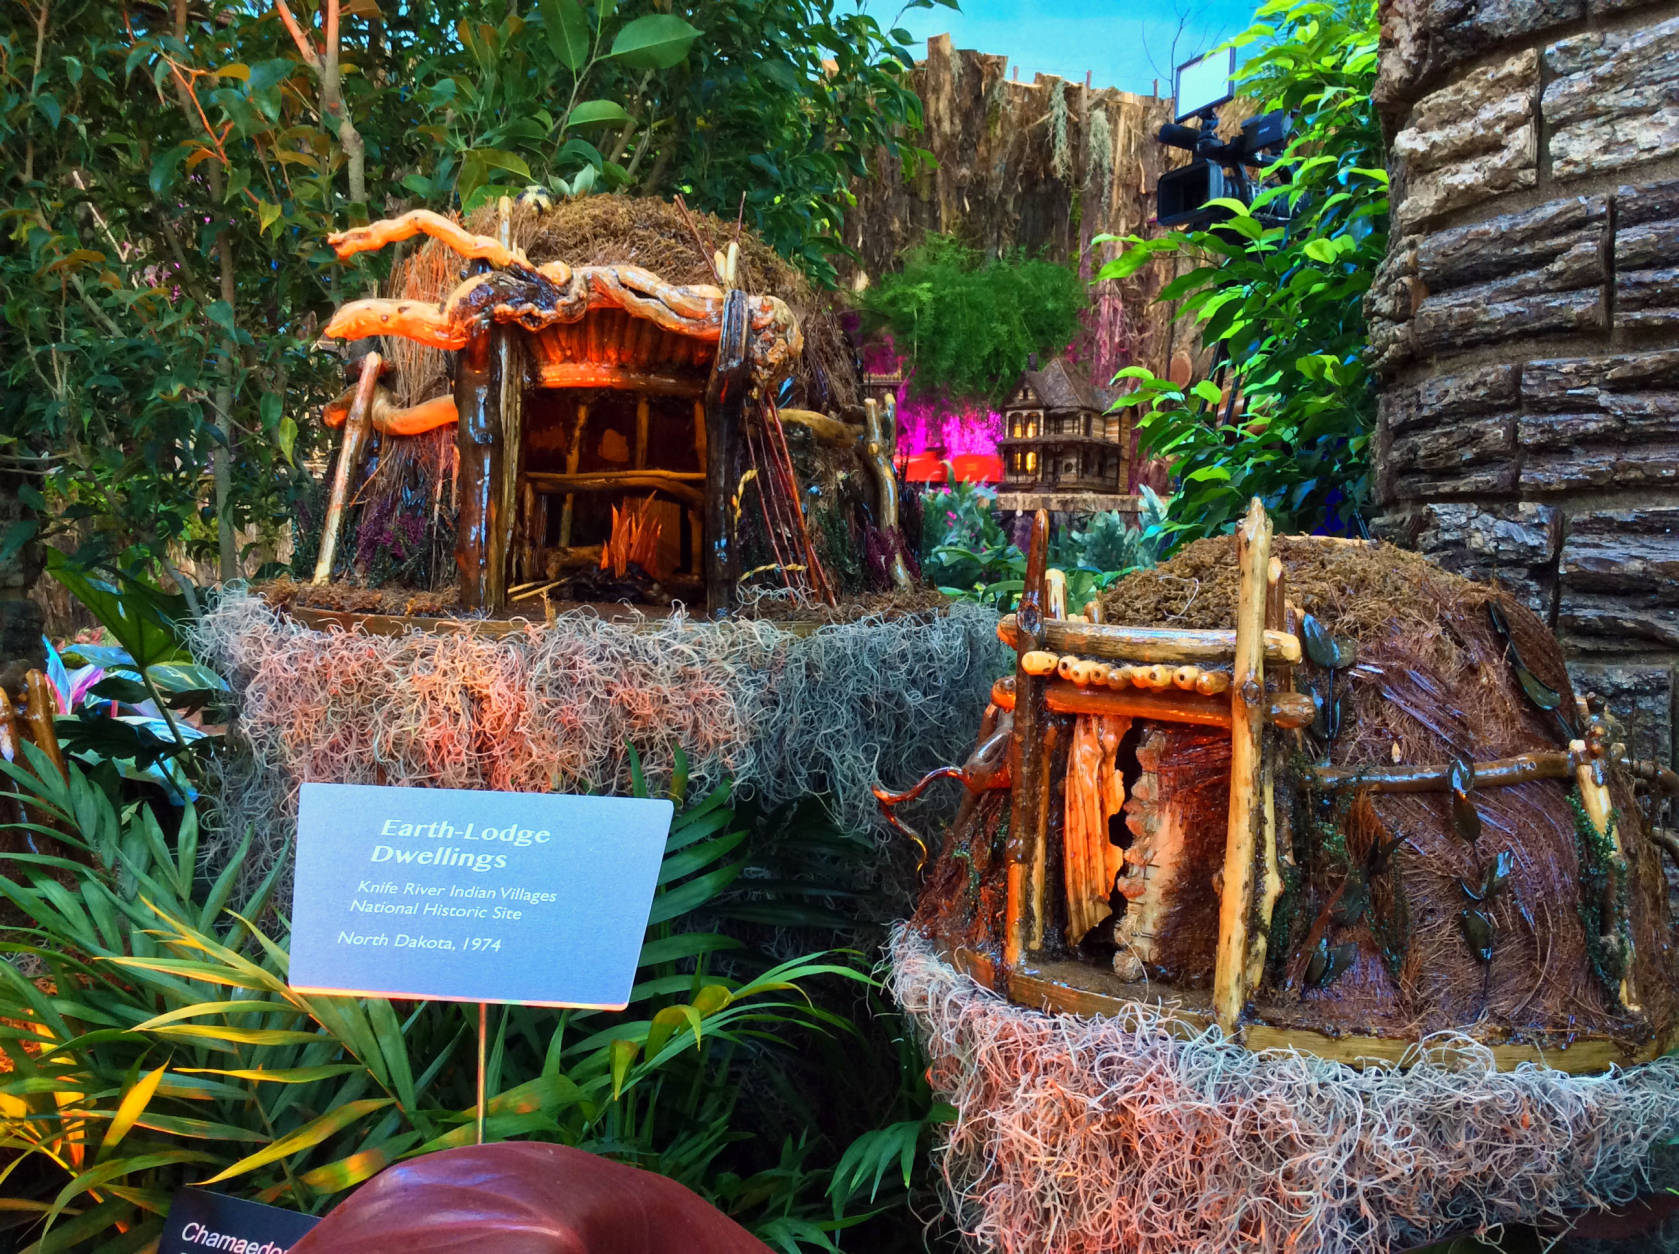 The exhibit also features recreations of national historic sites such as the Earth-Lodge Dwellings in North Dakota. (WTOP/Hanna Choi)